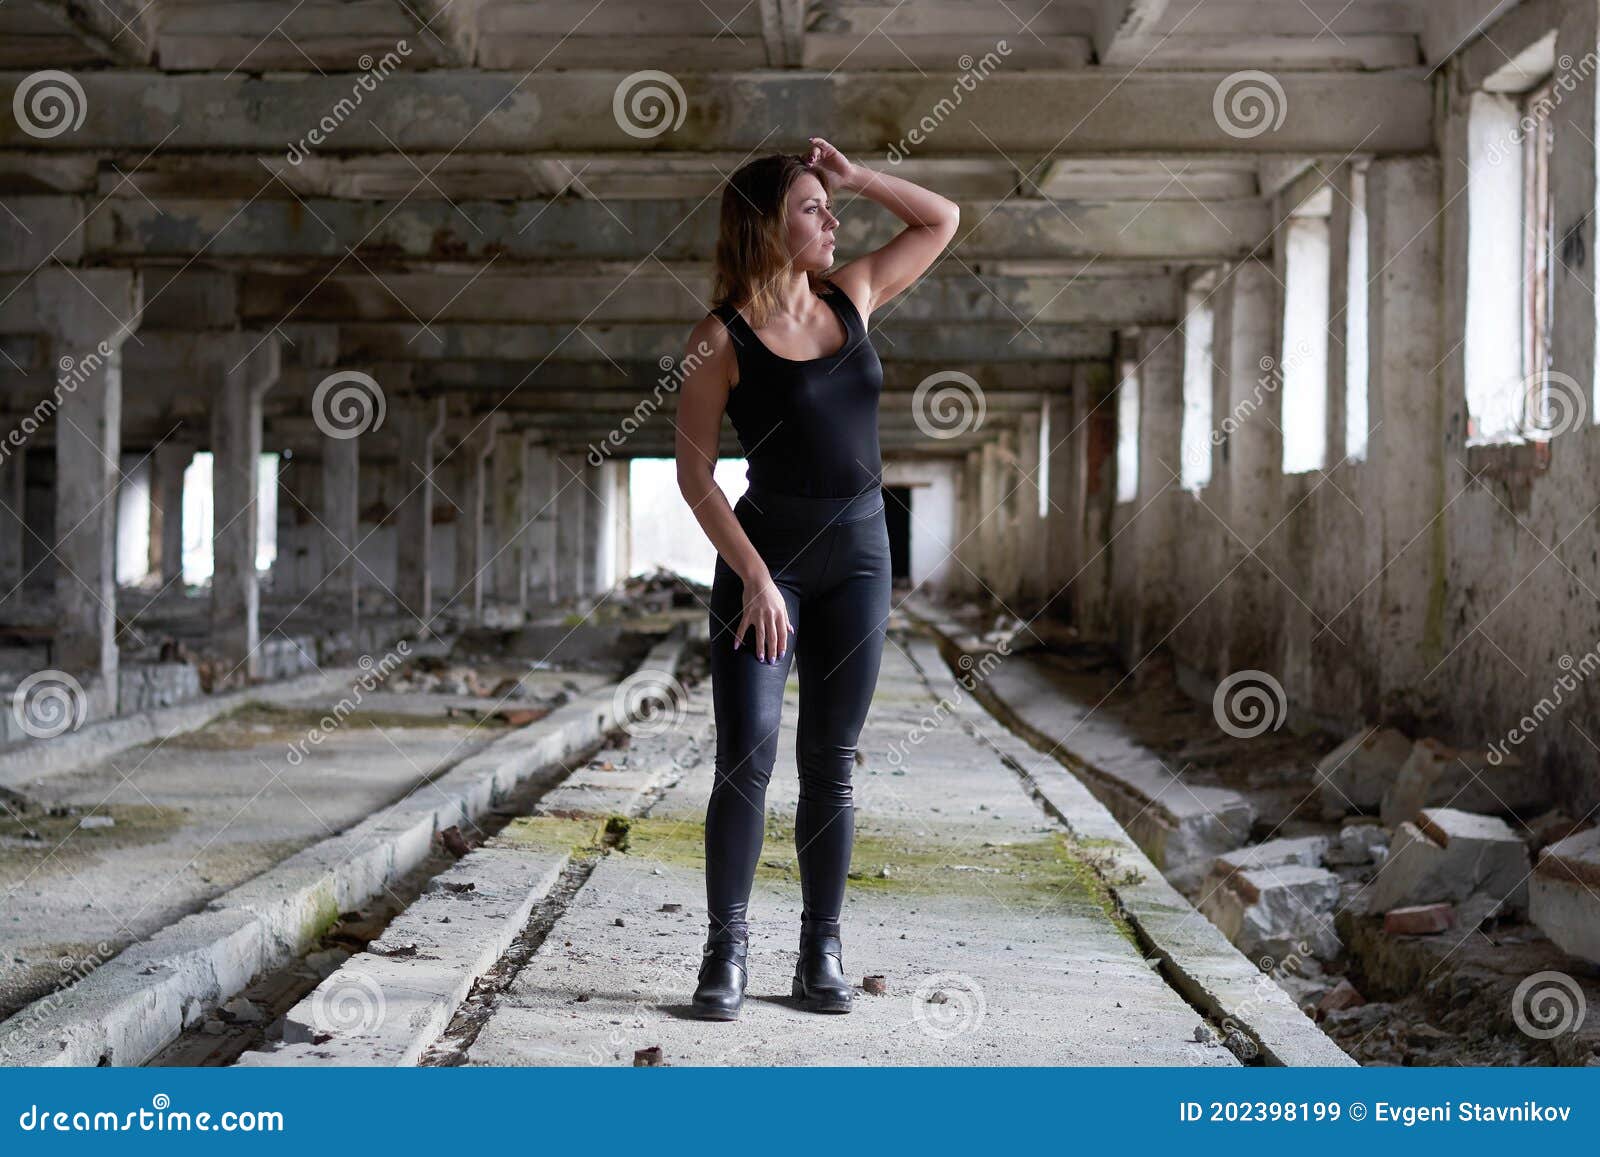 A Woman On The Ruins In A Ruined City With Garbage Stock Image Image